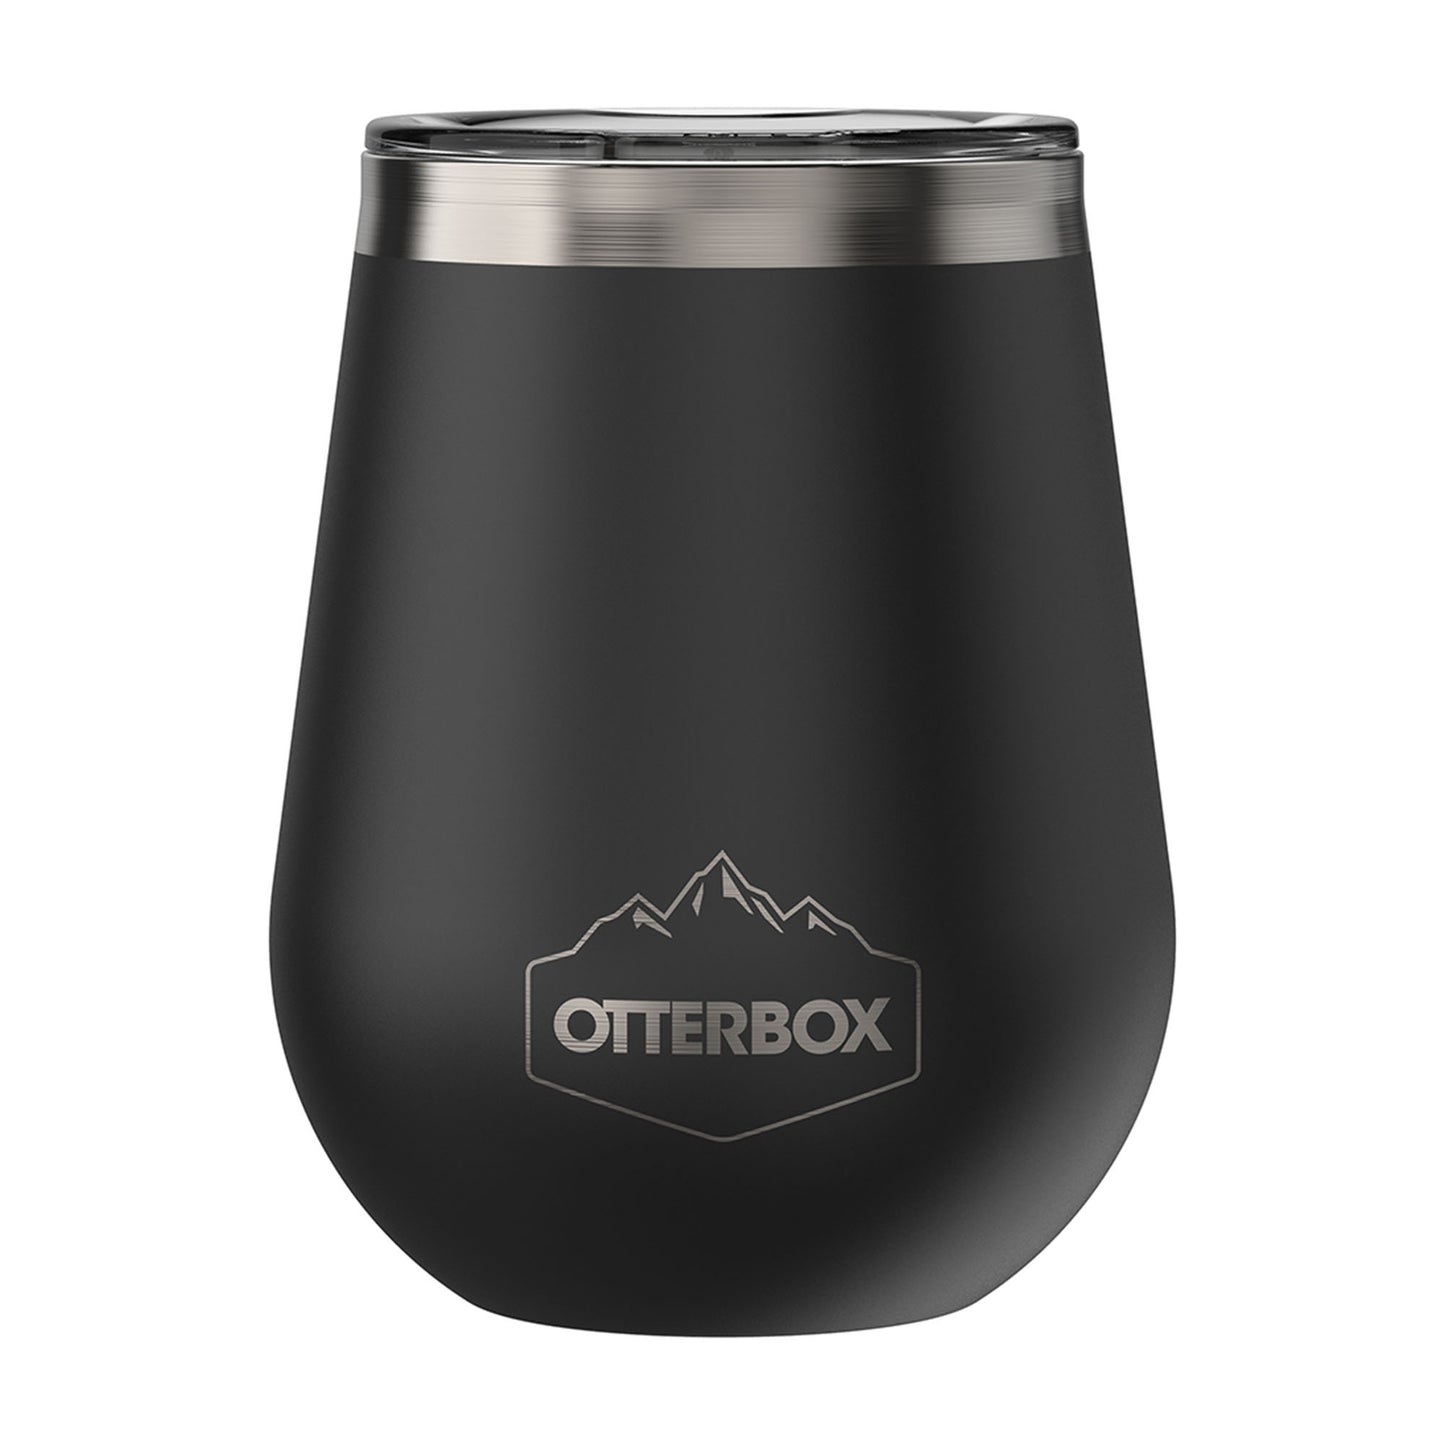 Otterbox Stainless Steel Black/Silver (Silver Panther) Elevation Wine Tumbler w/ lid - 15-05240